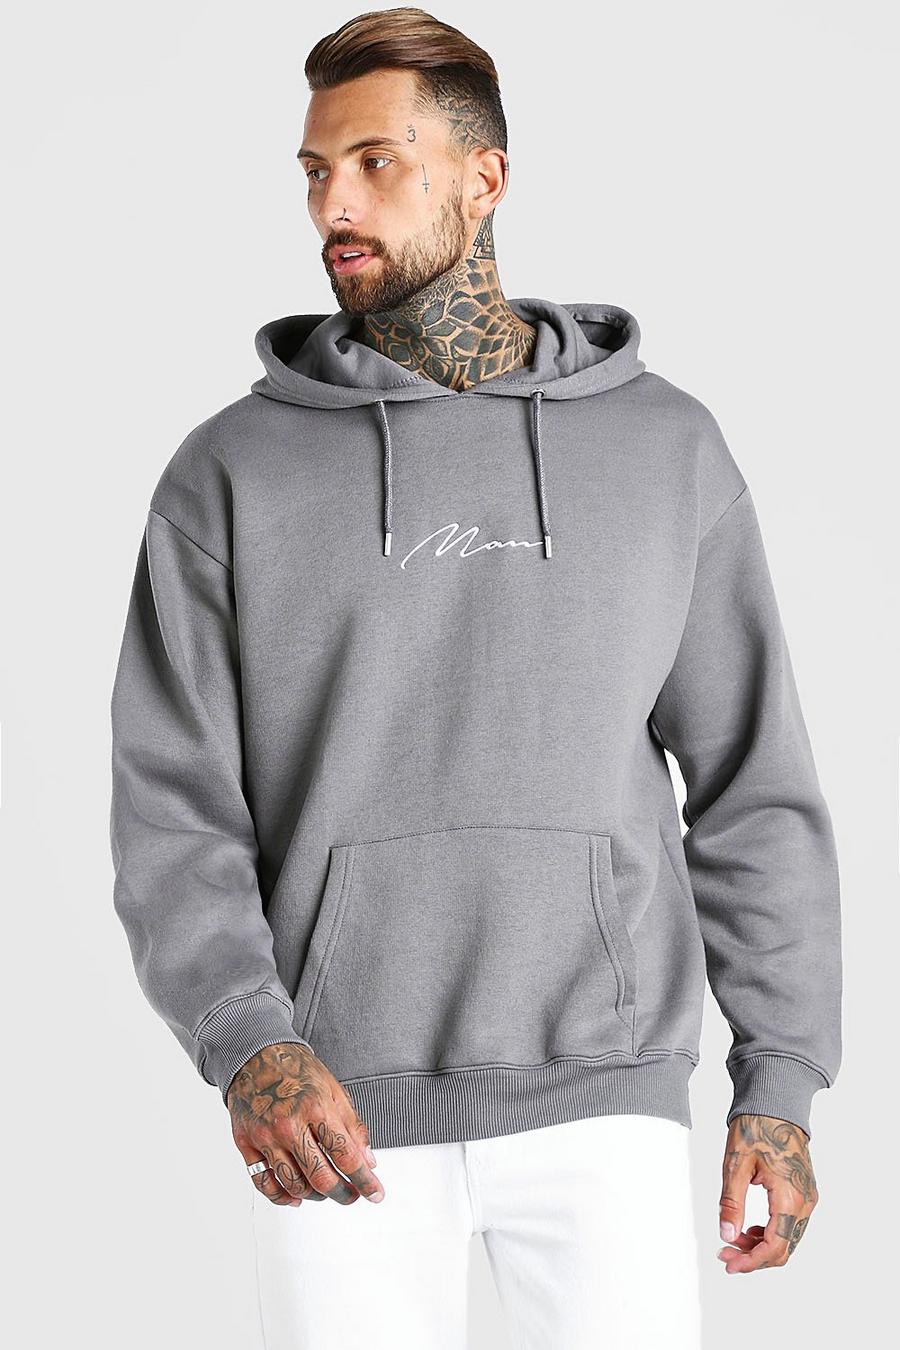 BoohooMAN Tall Man Signature Embroidered Hoodie in Green for Men